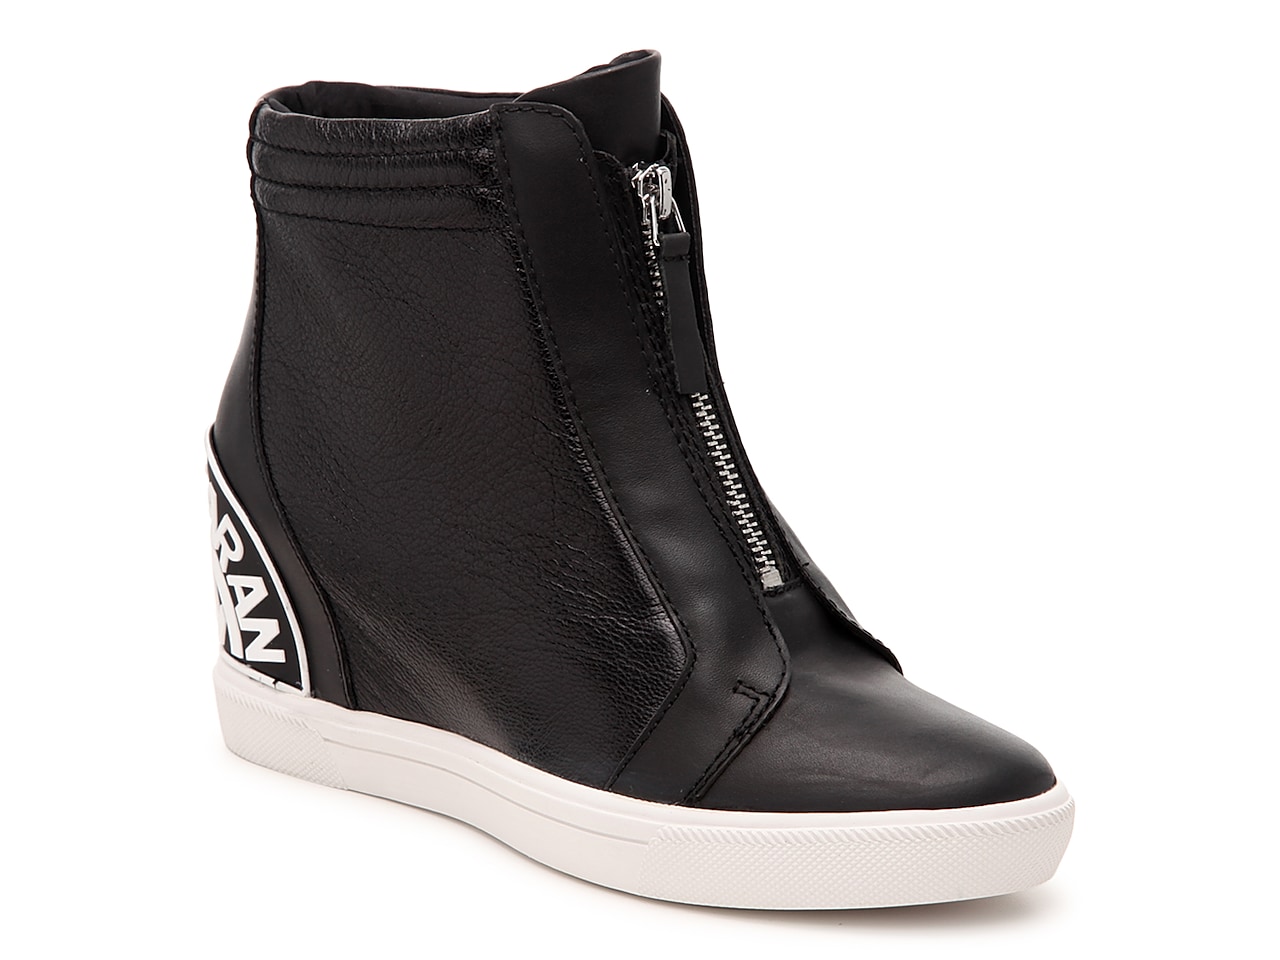 DKNY Connie Wedge High-Top Sneaker Women's Shoes | DSW